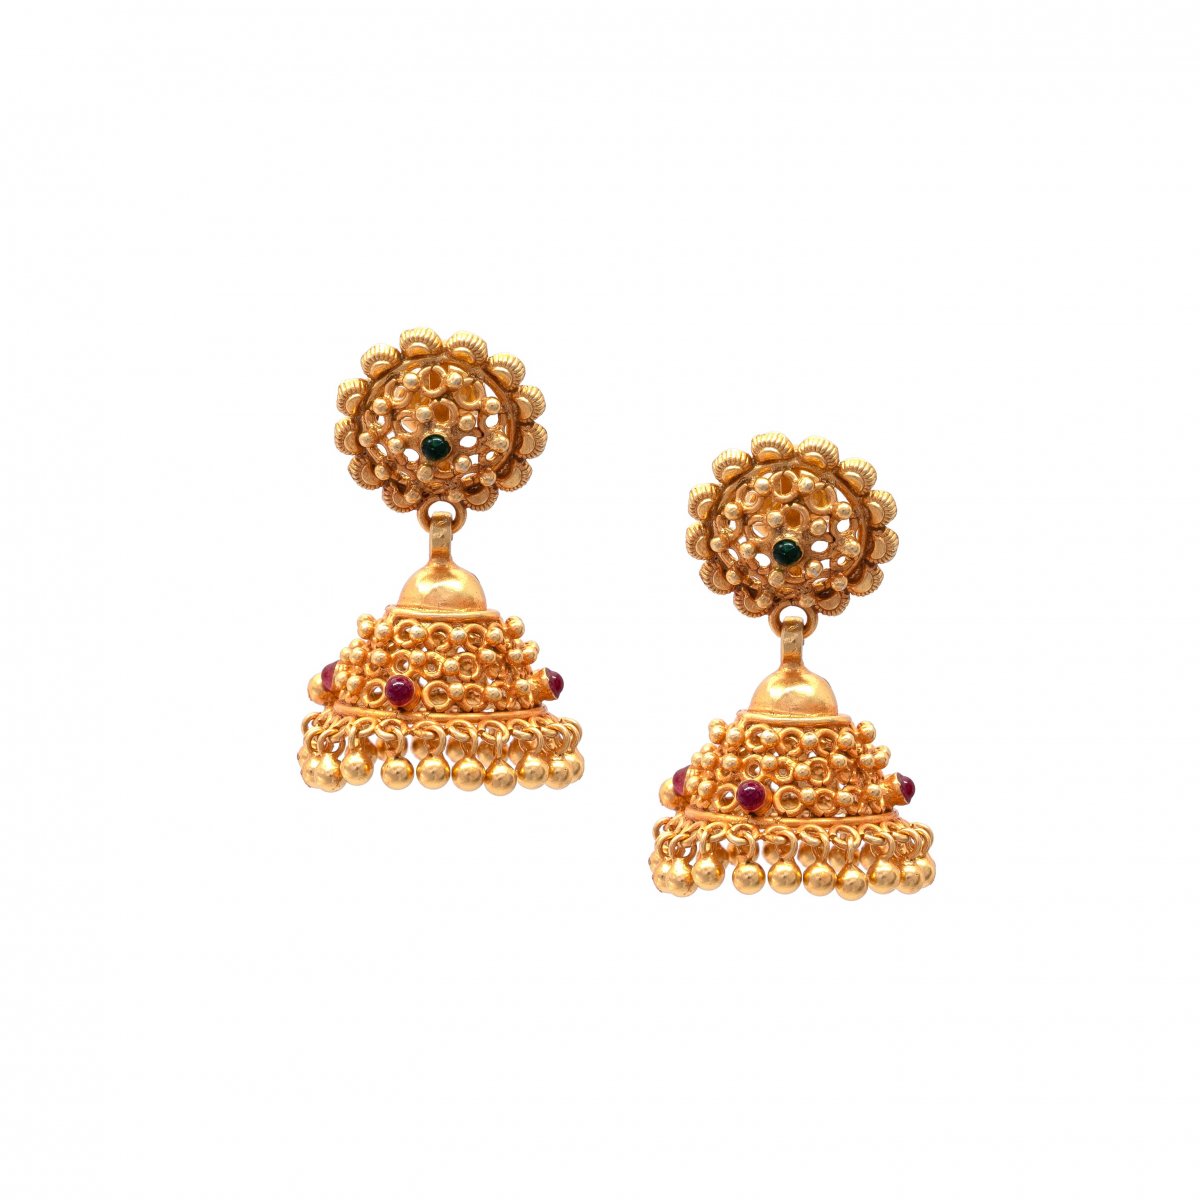  GOLD POLISHED SCRE BACK TRADITIONAL NAGAS JHUMKAS SET FOR WIFE